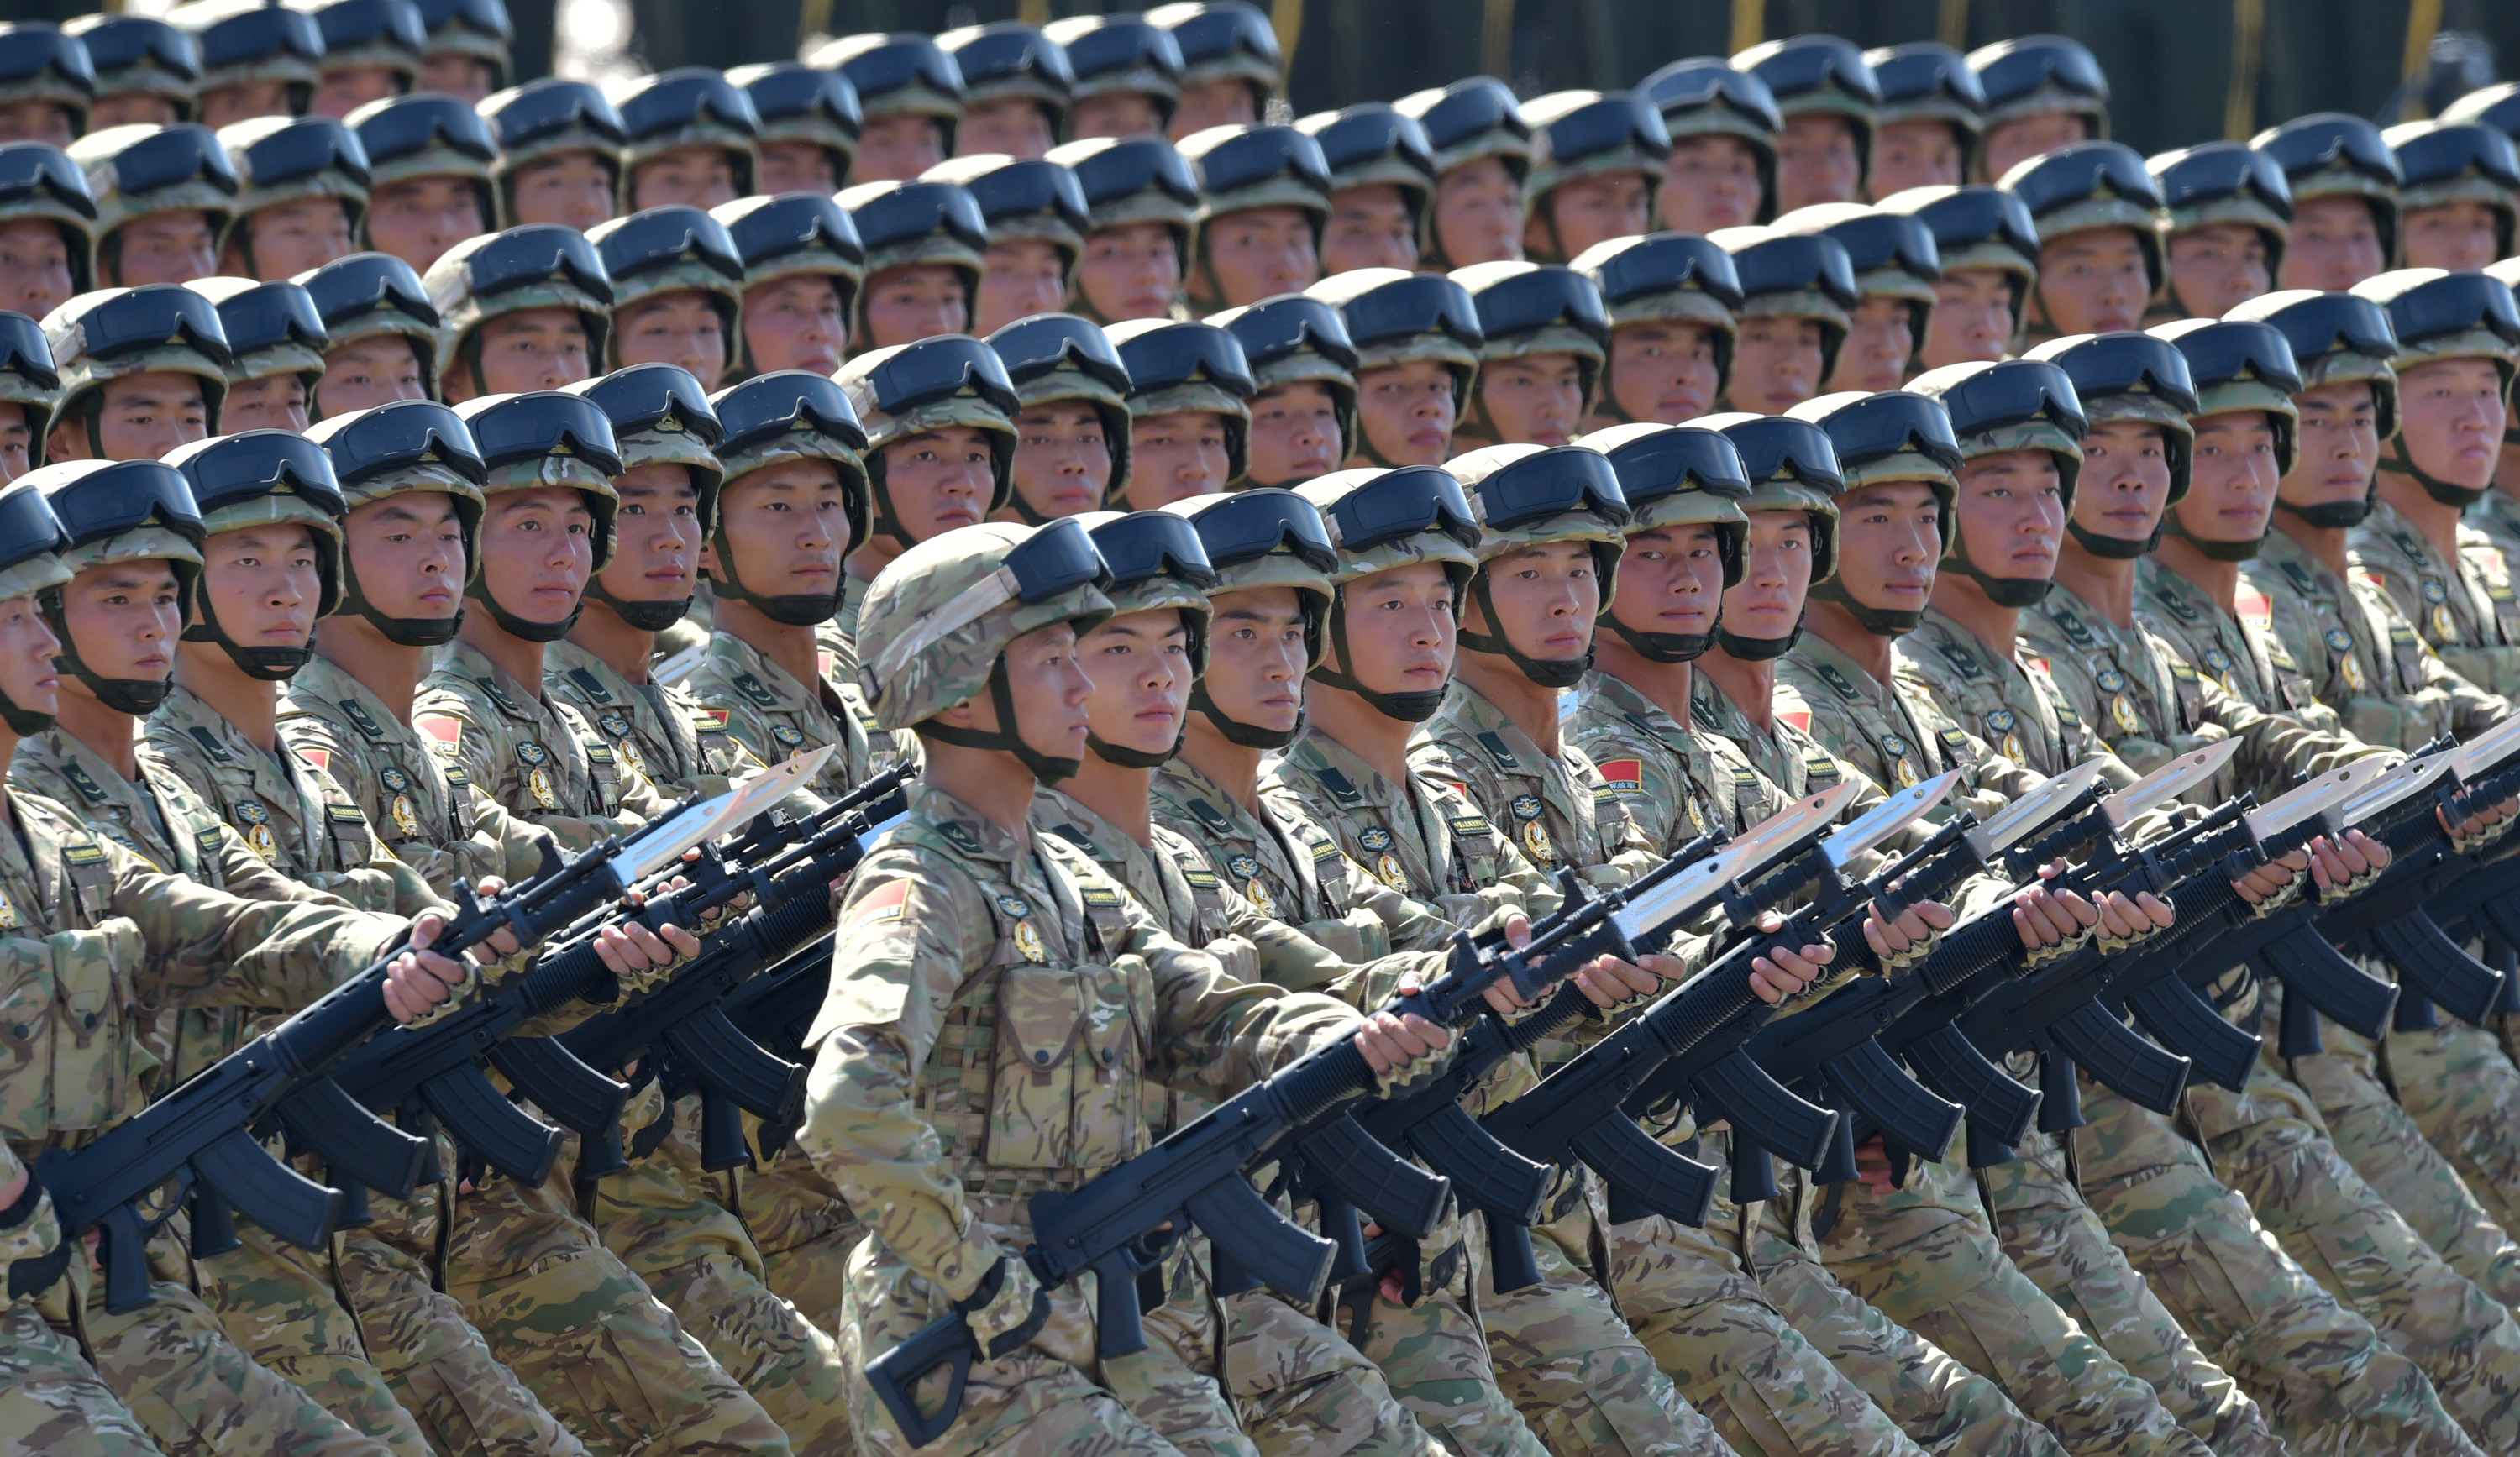 Soldiers attend a military parade in Beijing, China, on Sept. 3, 2015, to mark the 70th anniversary of the military victory against Japan (Luo Xiaoguang—Xinhua News Agency/Getty Images)